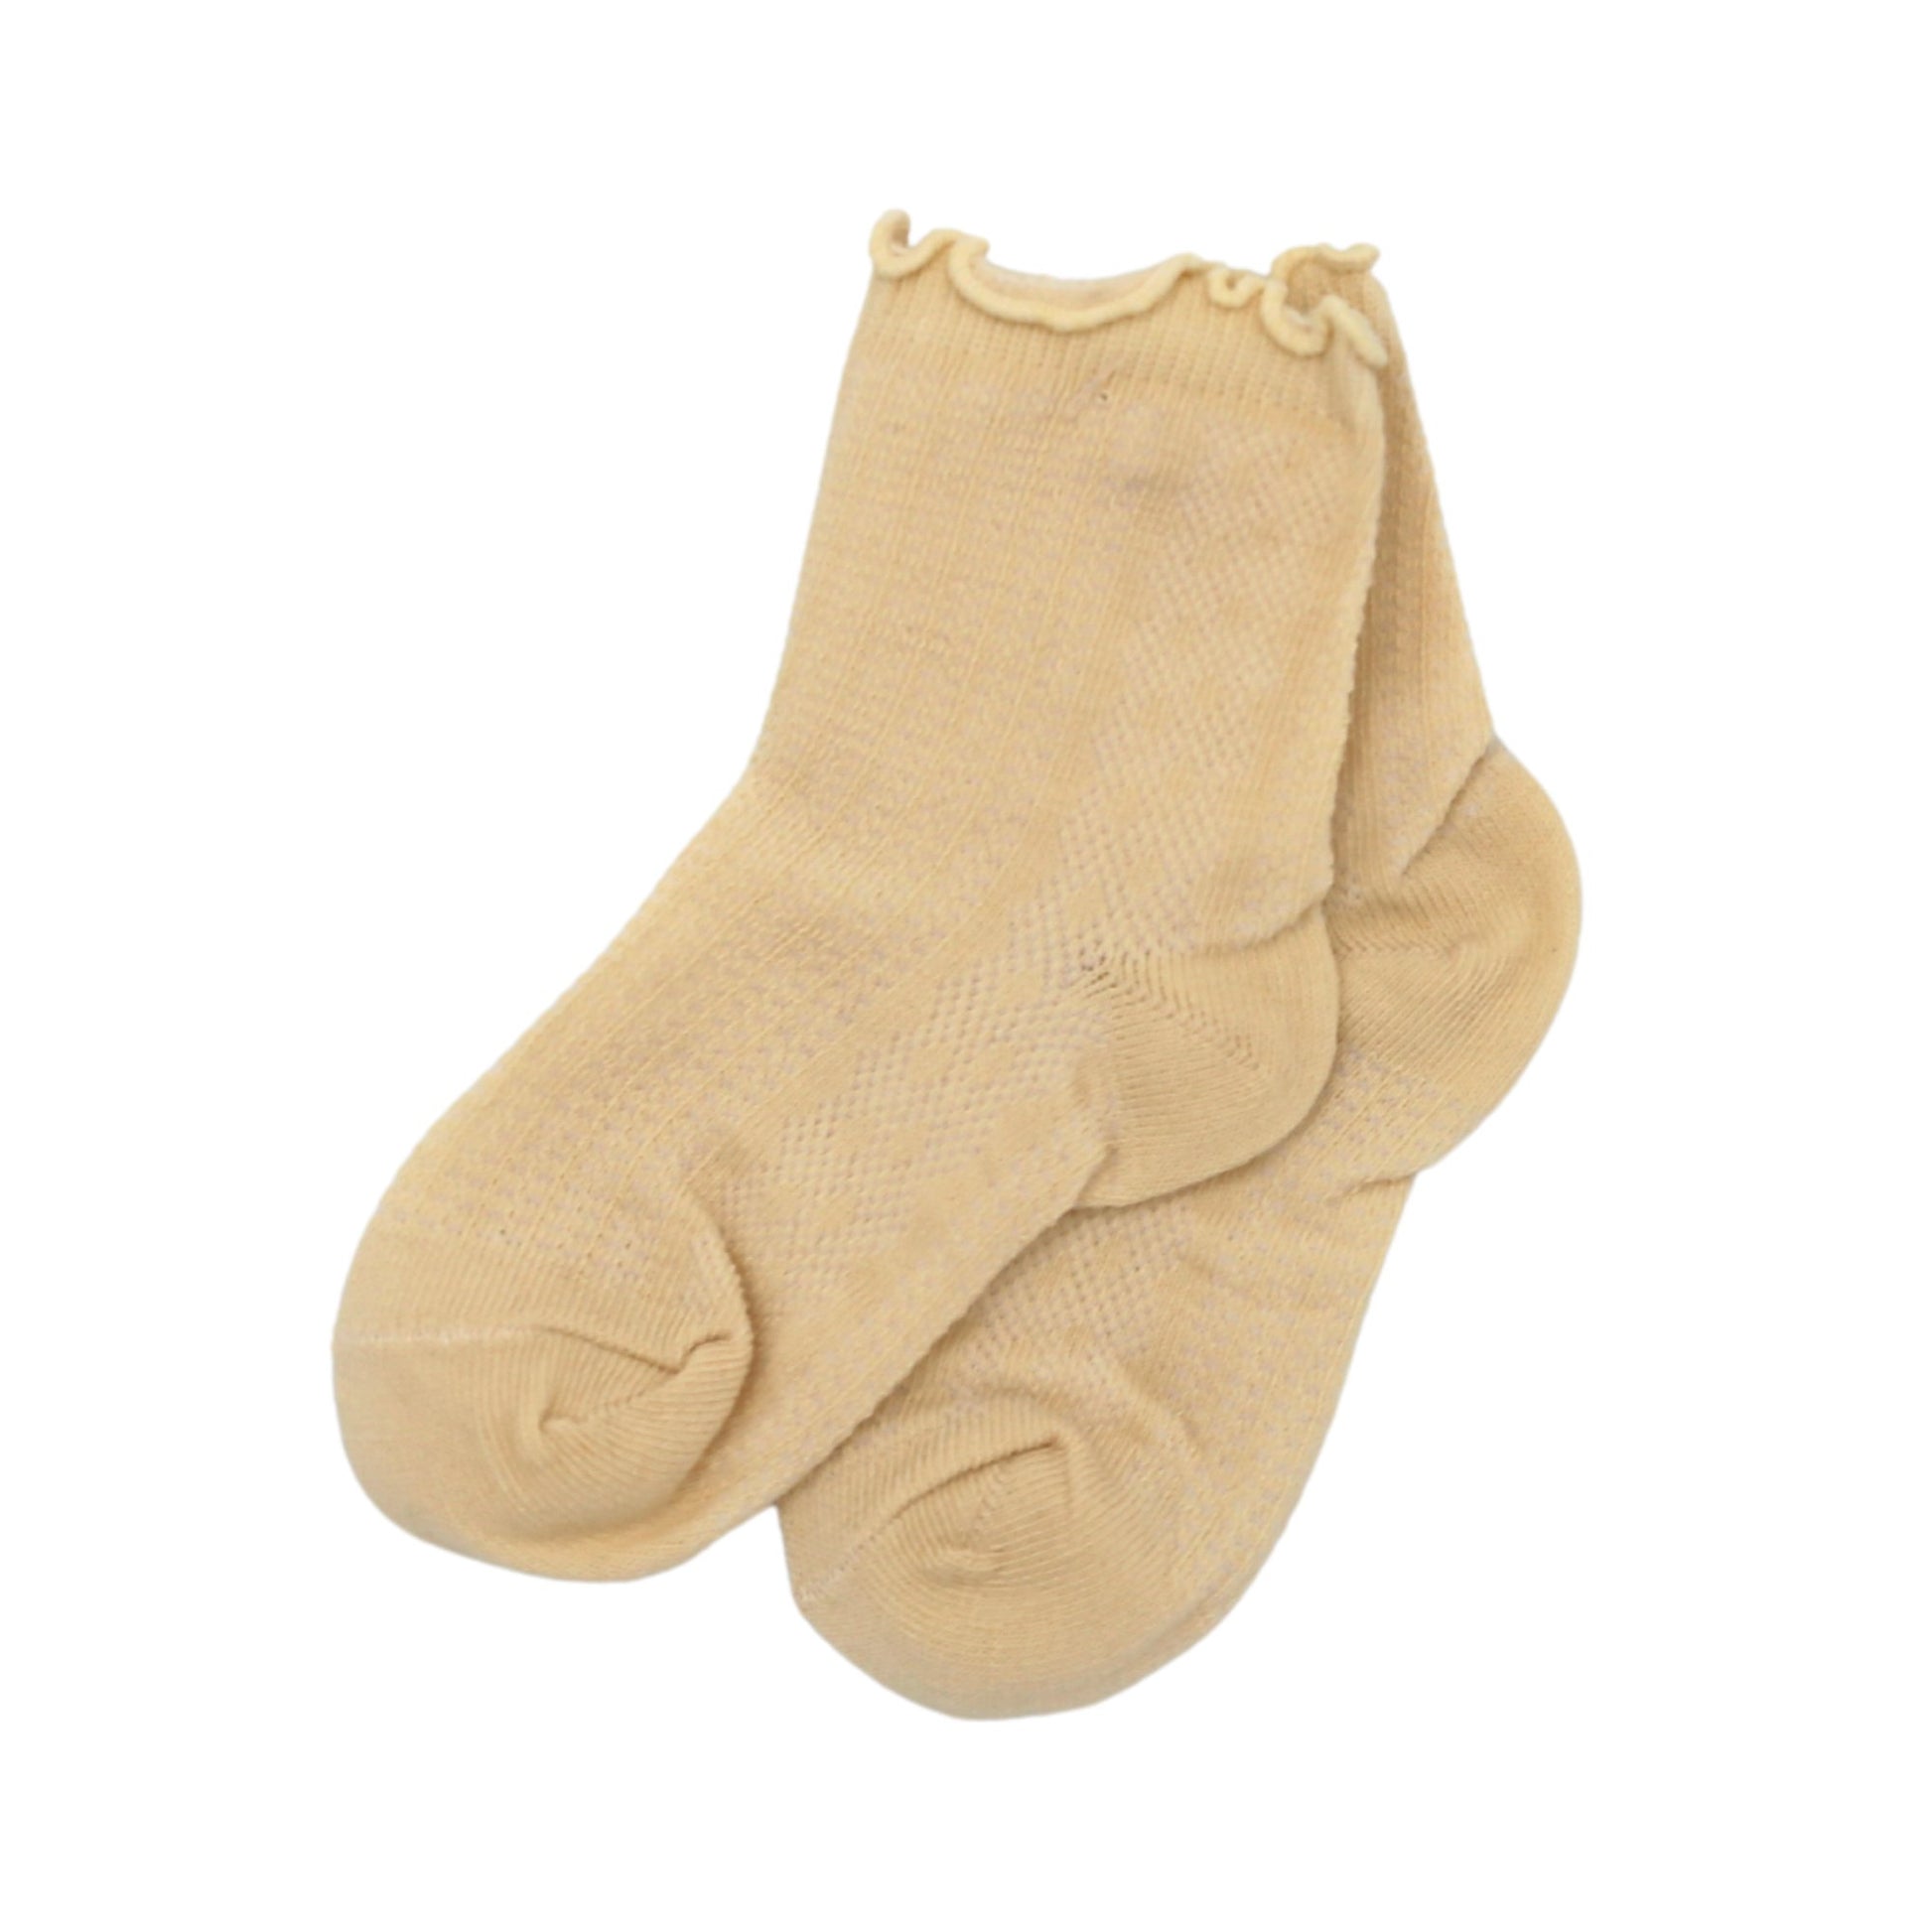 Baby Cubby Patterned Scallop Rib Socks - Cream